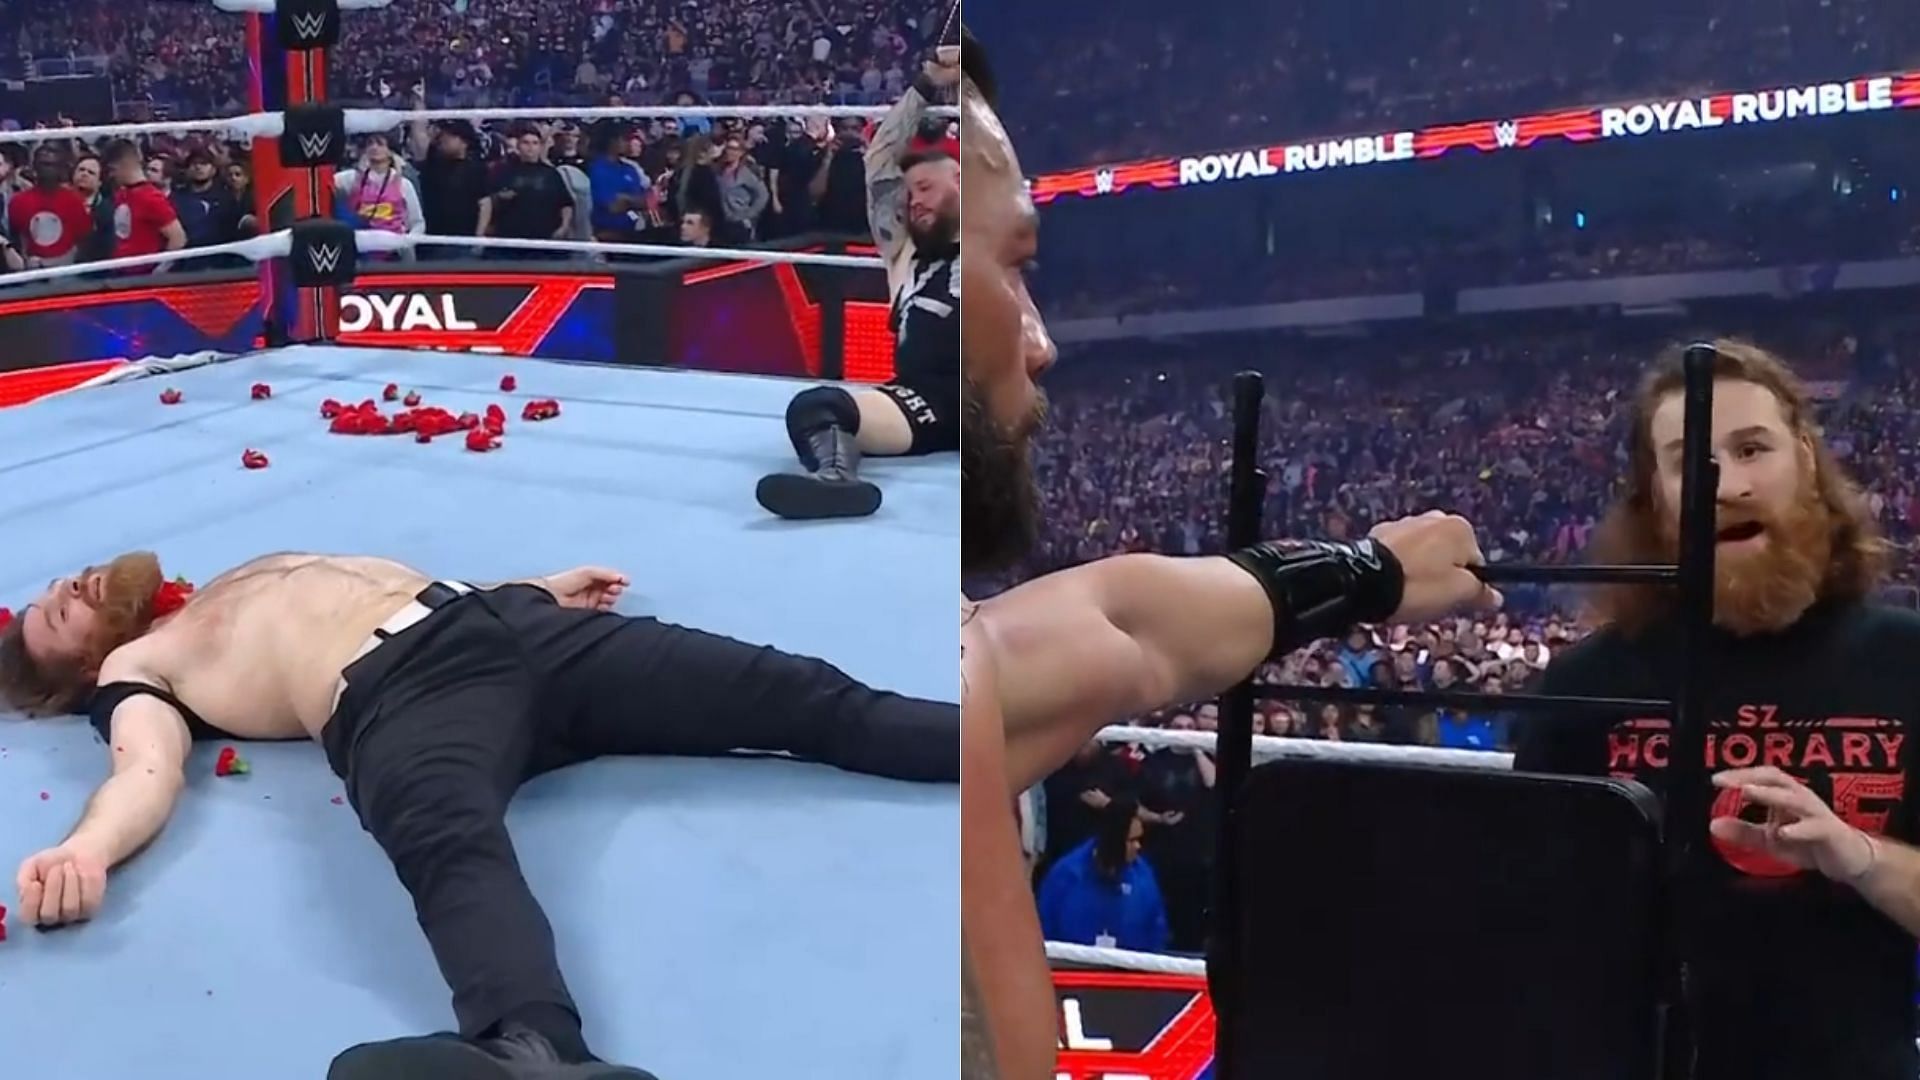 Sami Zayn learned a harsh lesson after betraying Roman Reigns.